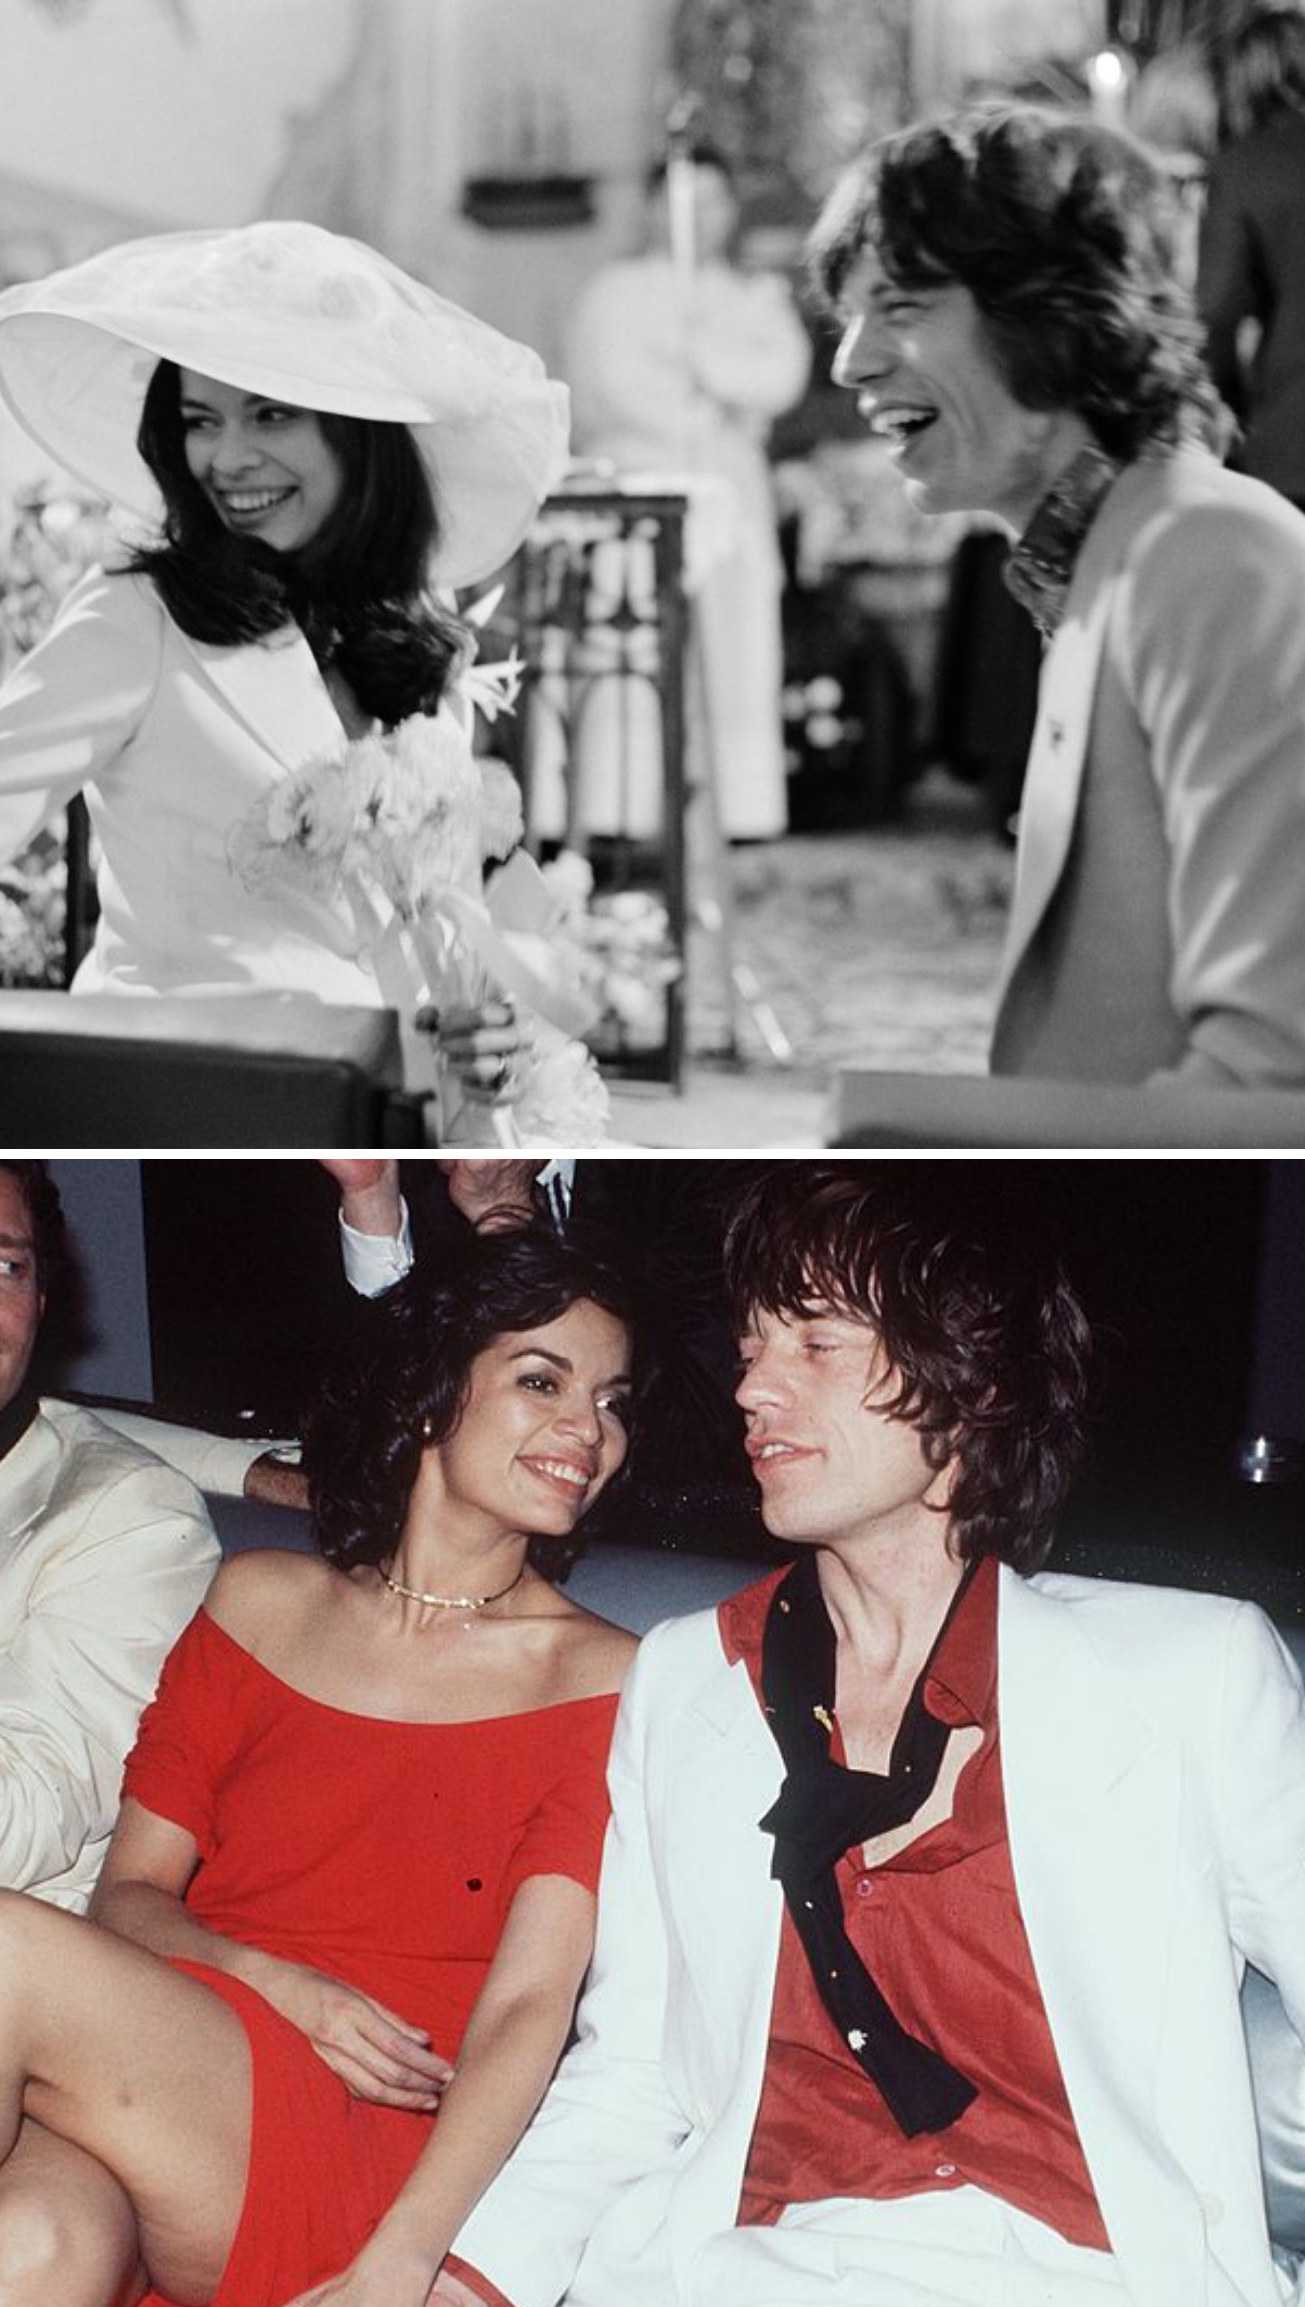 Mick and Bianca getting married in 1971; Mick and Bianca at Studio 54 in 1977